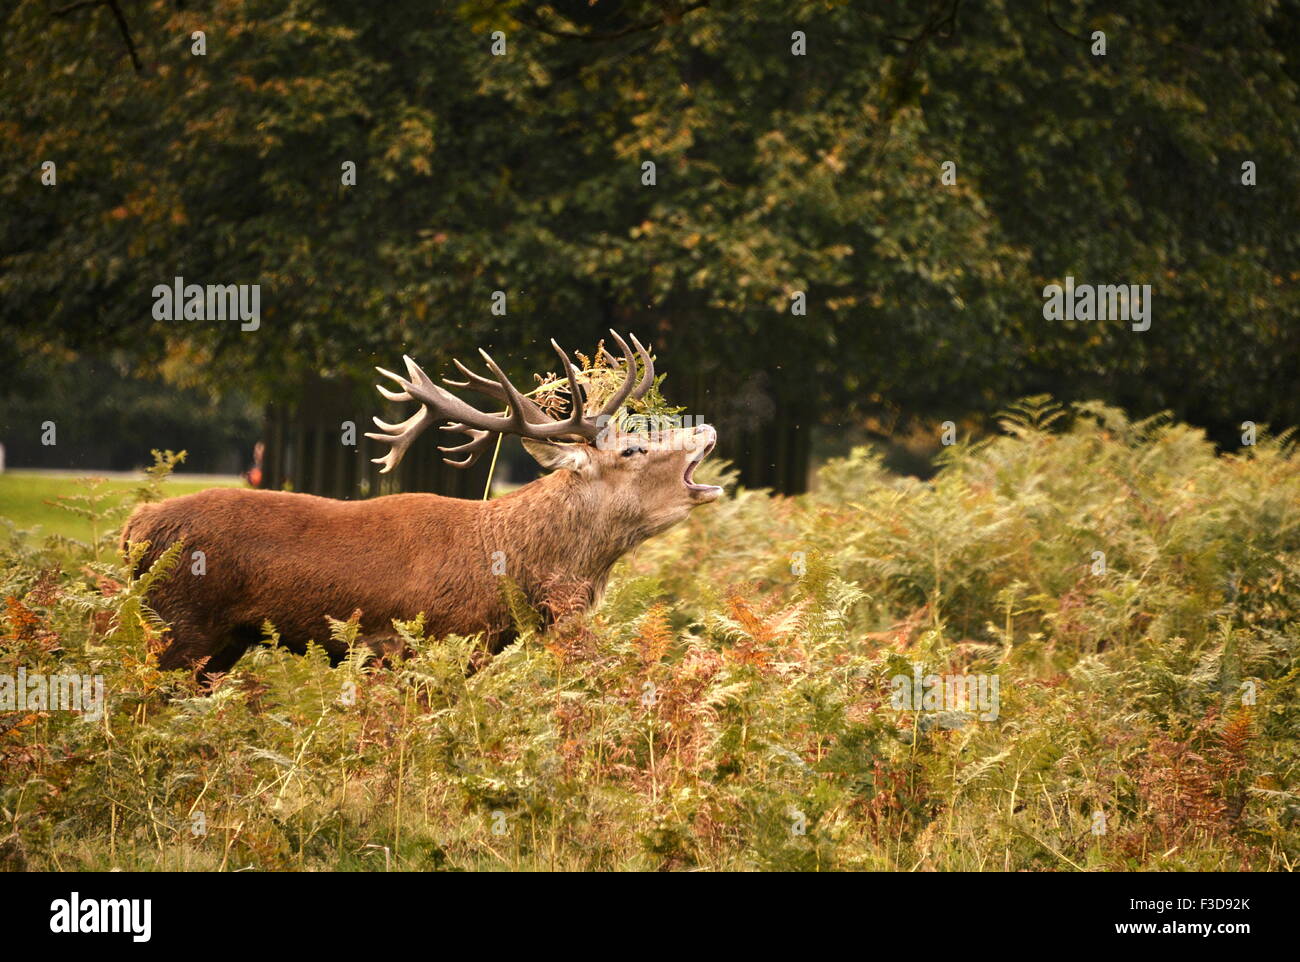 London, UK. 4th October, 2015. Stag Rut signals Autumn is here. Male deer compete for dominance of the herd as the mating season begins in Bushy Park, West London. Rutting Stags are heard belowing across the park before they encounter other male stags and lock antlers in a head to head fight to see who is the alpha male: 4 October 2015  Credit:  STUART WALKER/Alamy Live News Stock Photo